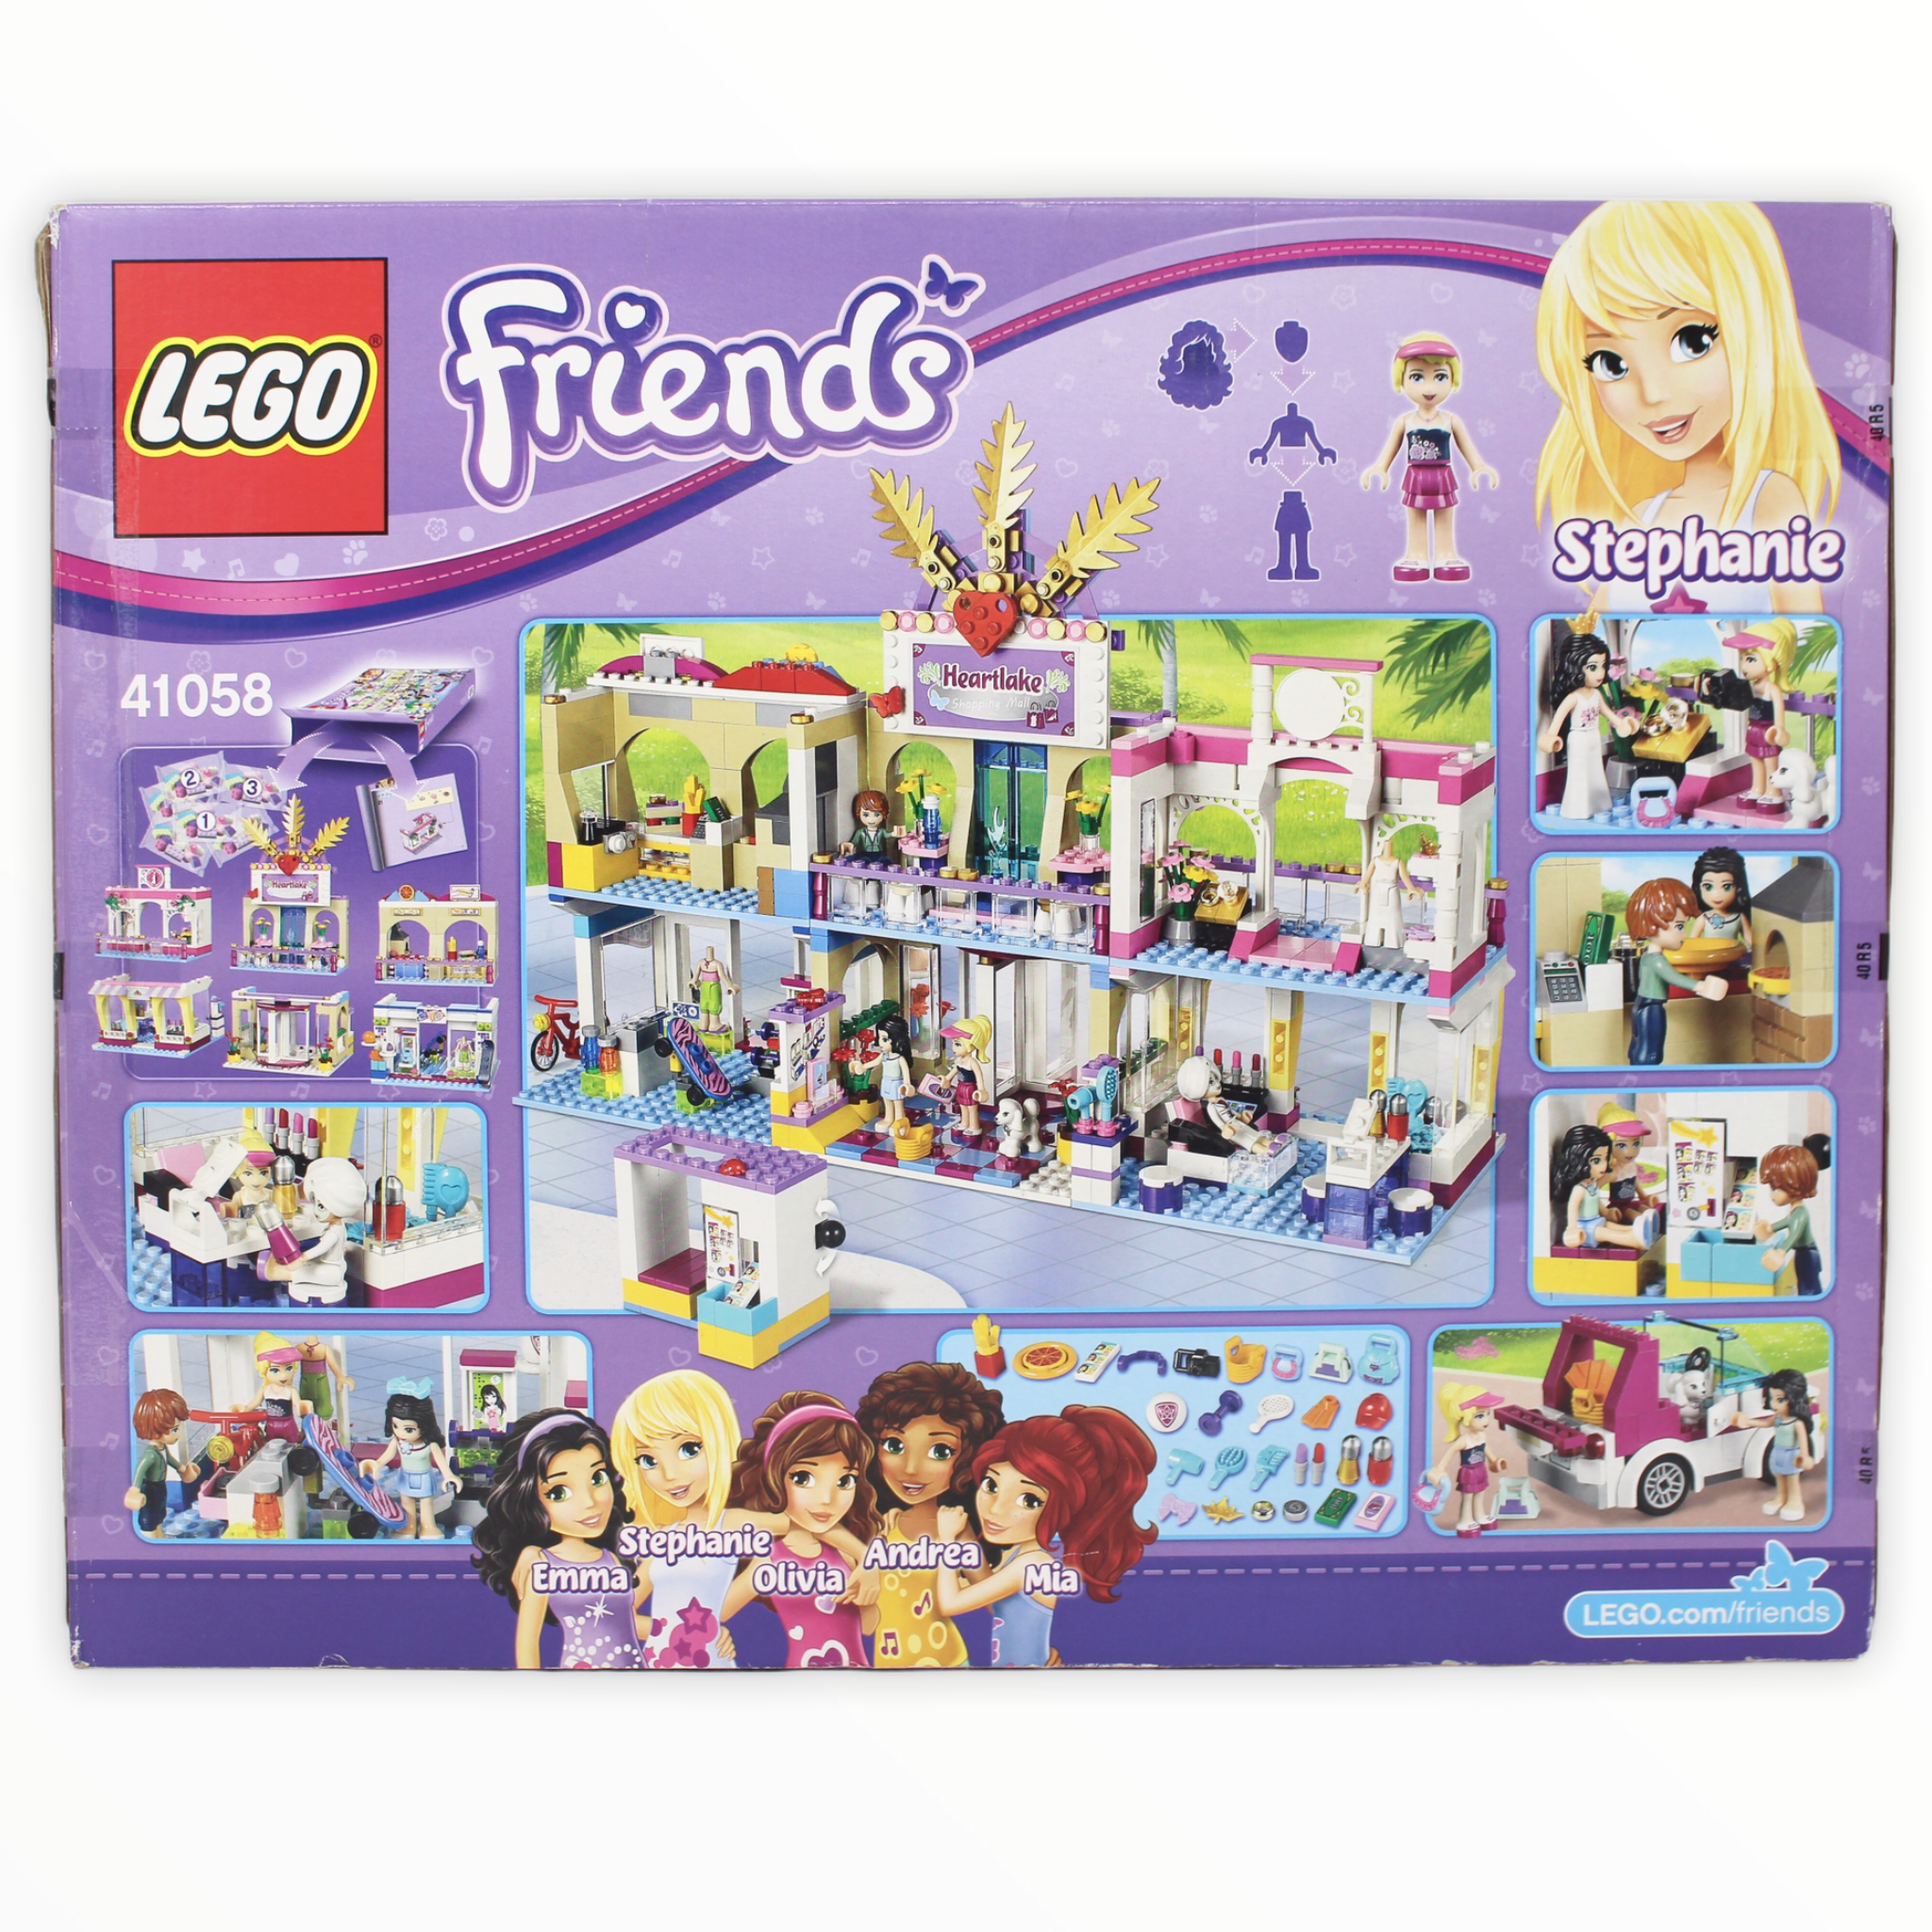 Certified Used Set 41058 Friends Heartlake Shopping Mall